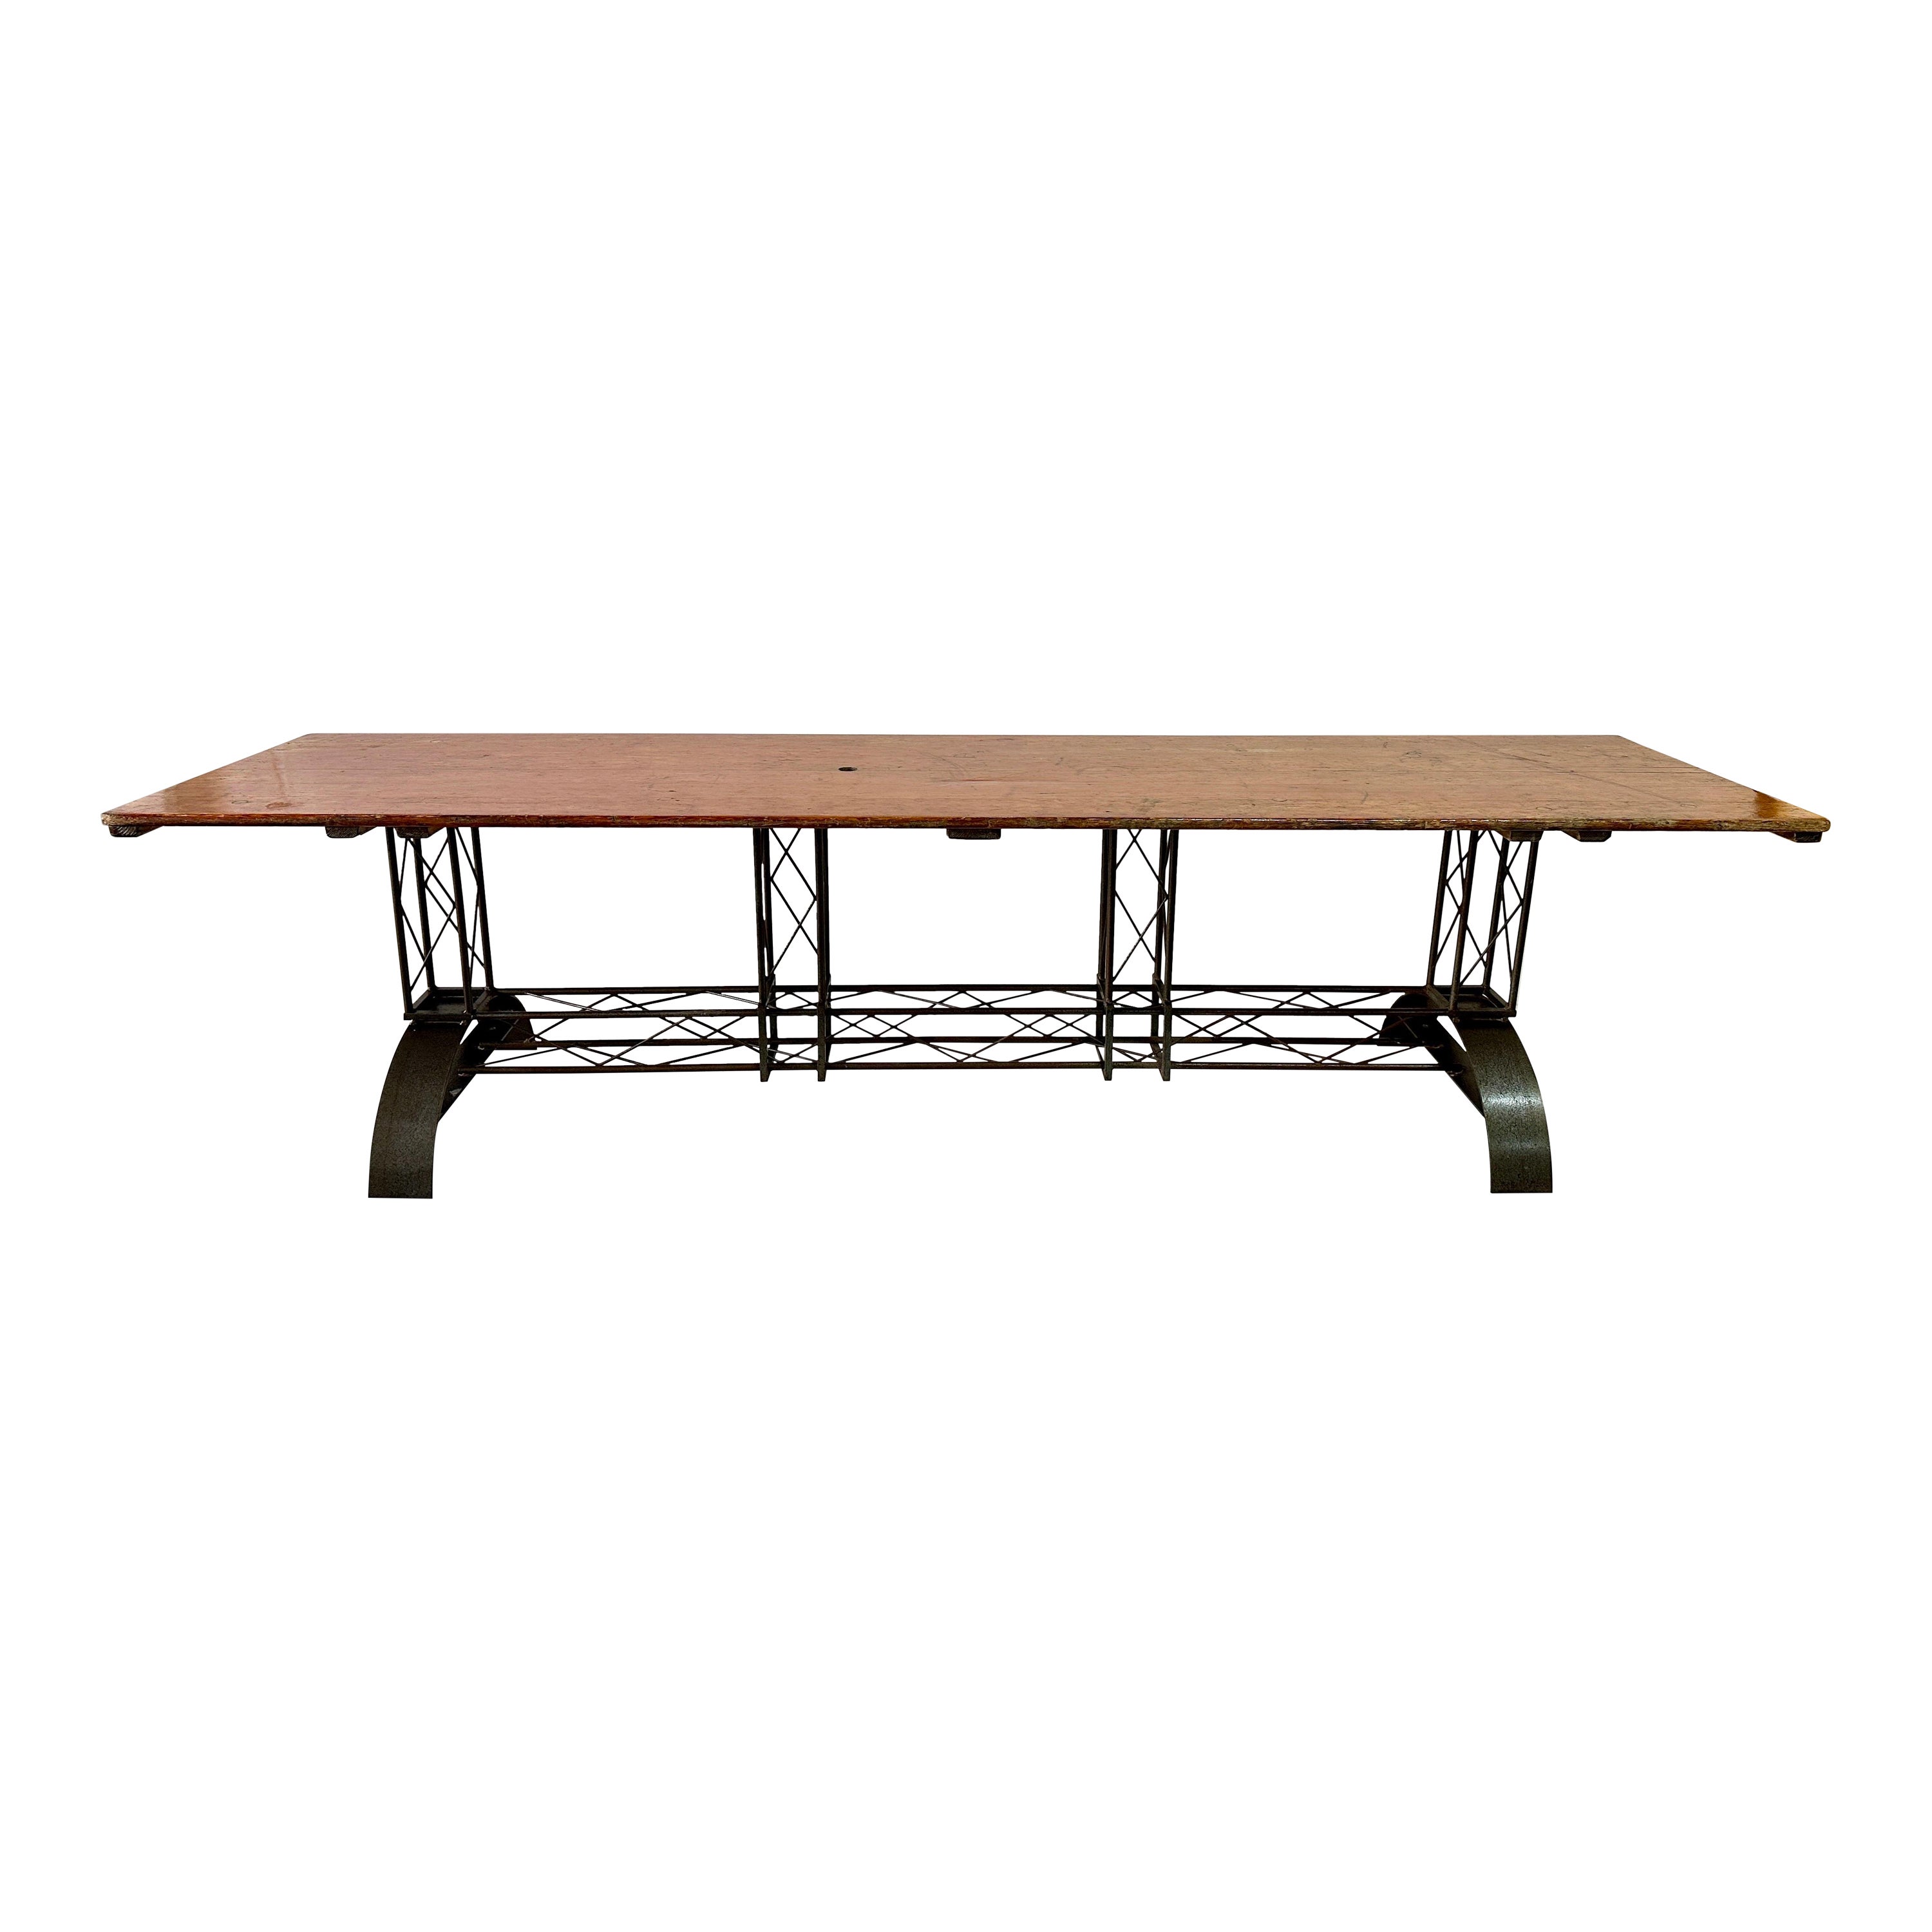 Extra Long French Architectural Iron Base Table w/ Distressed Wood Top